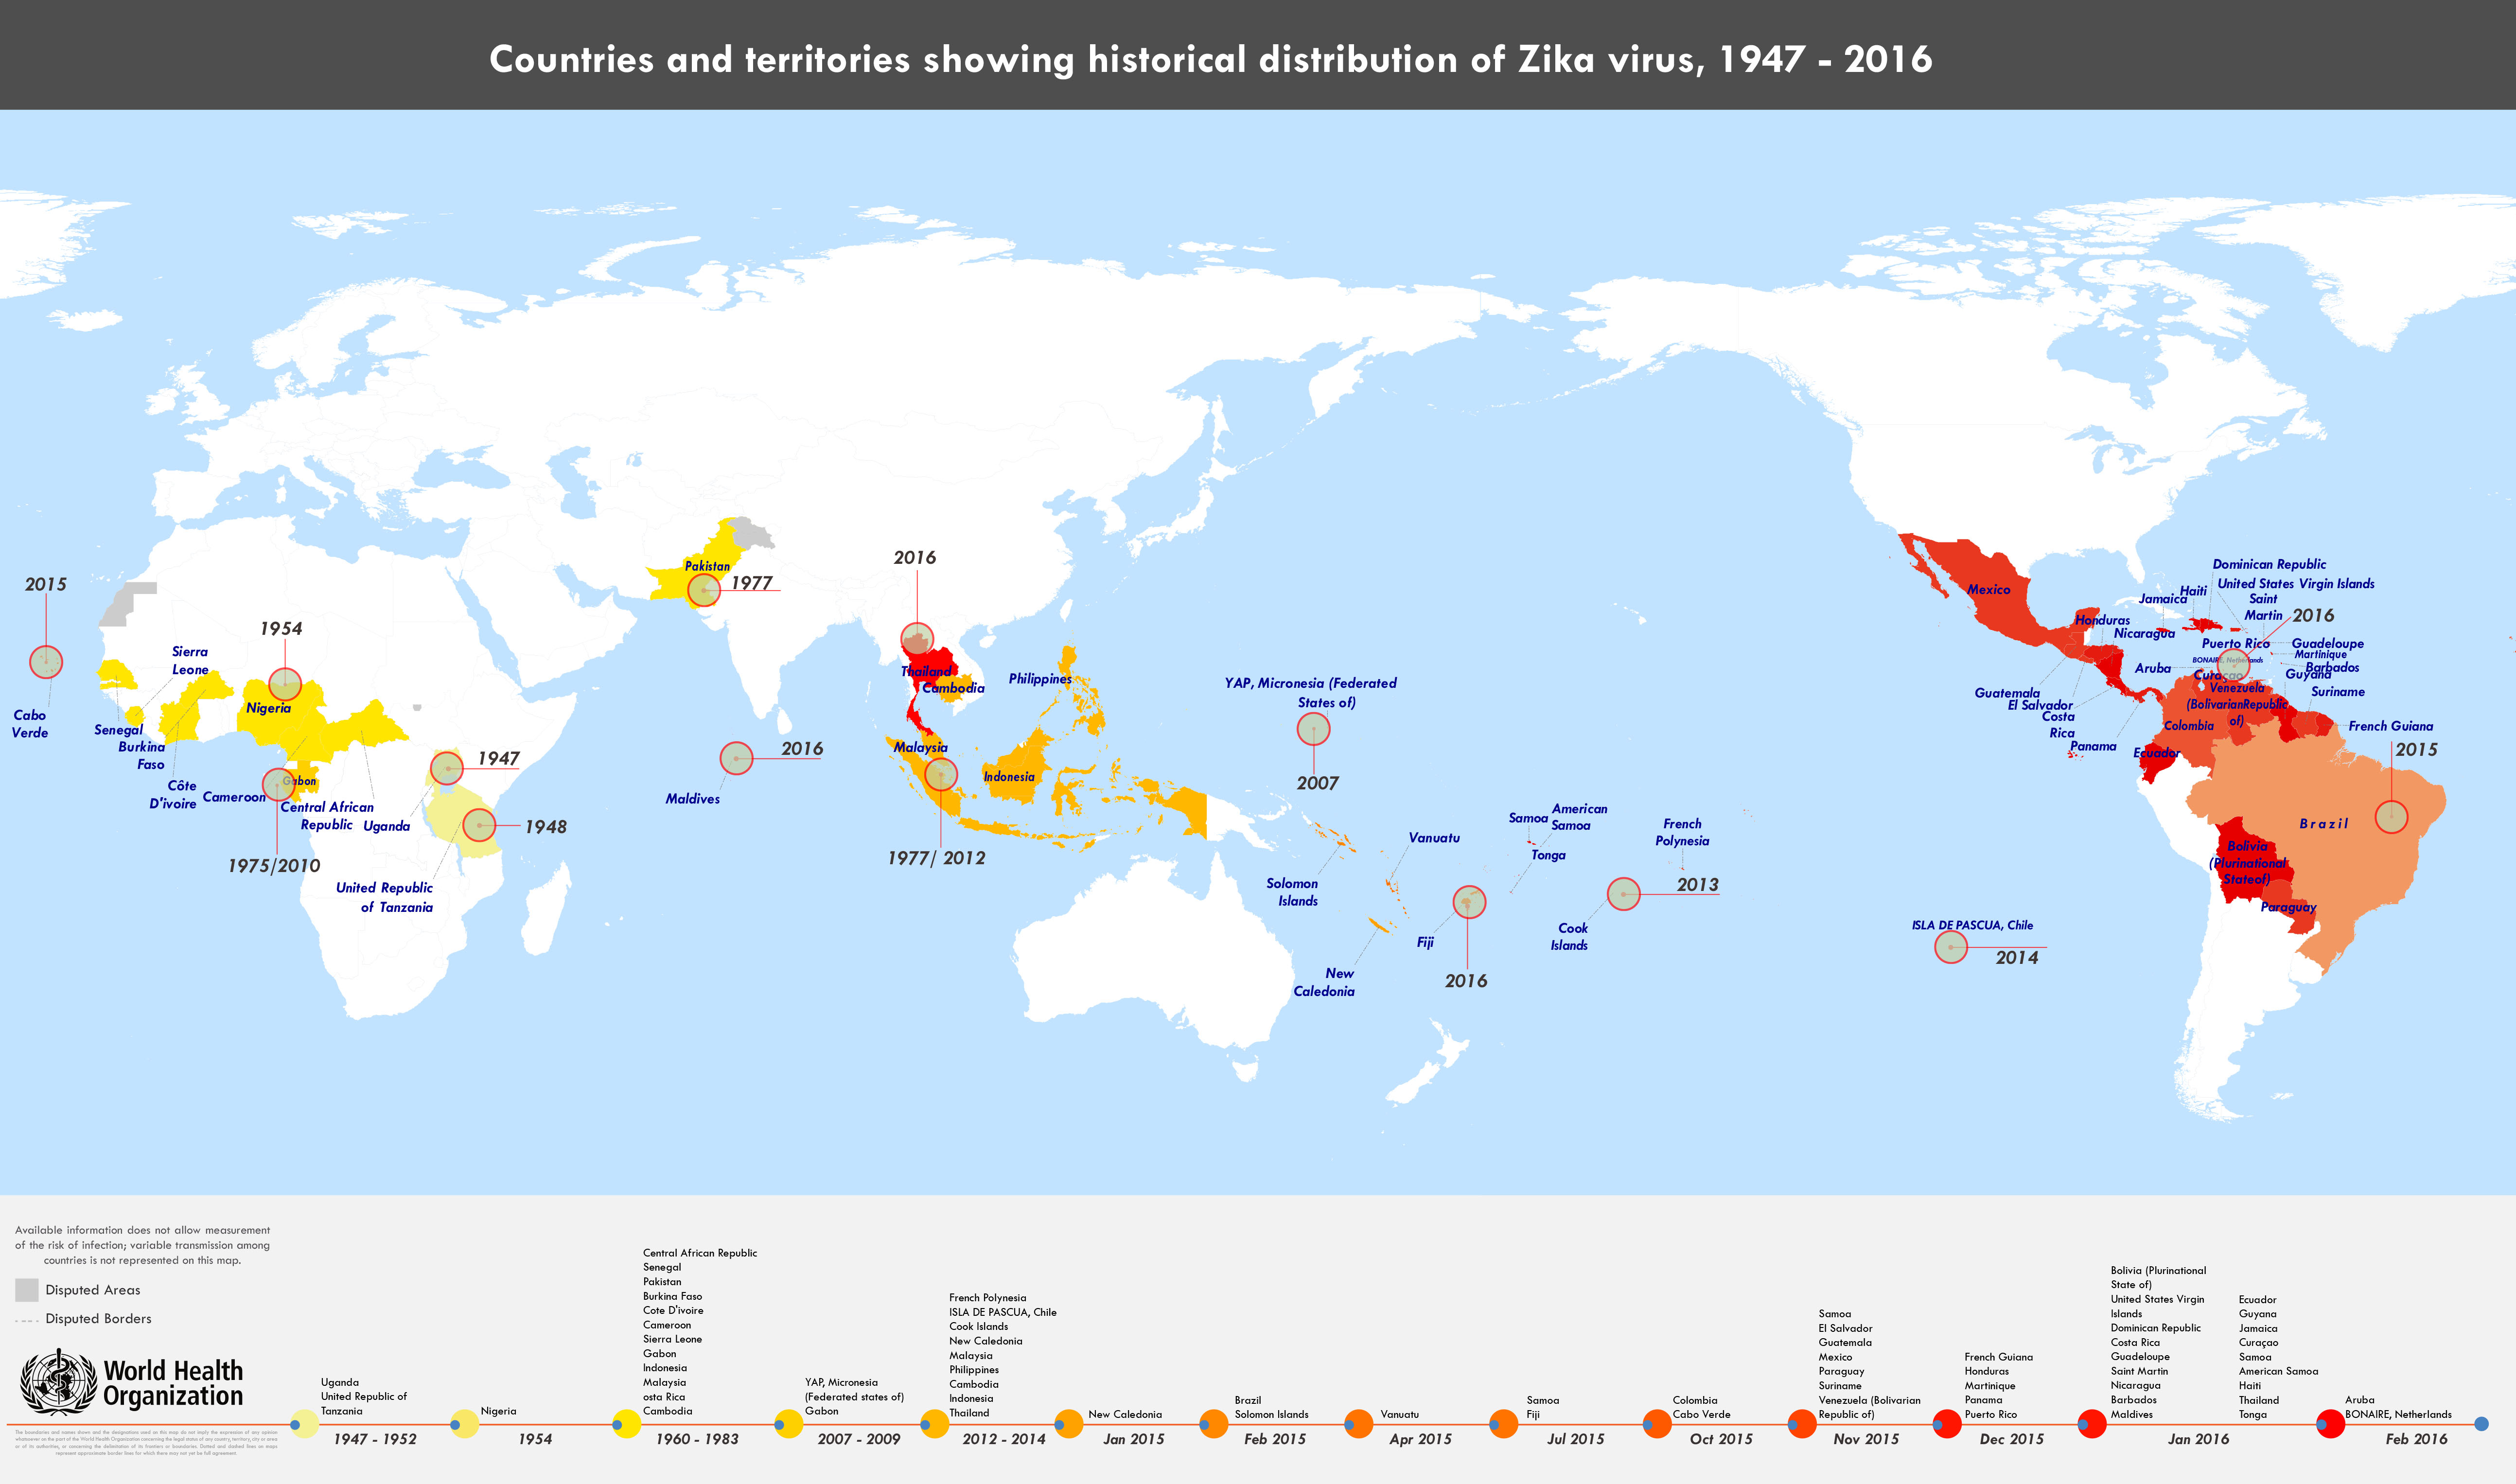 Countries and territories showing historical distribution of Zika virus, 1947 to 2016. (World Health Organization)